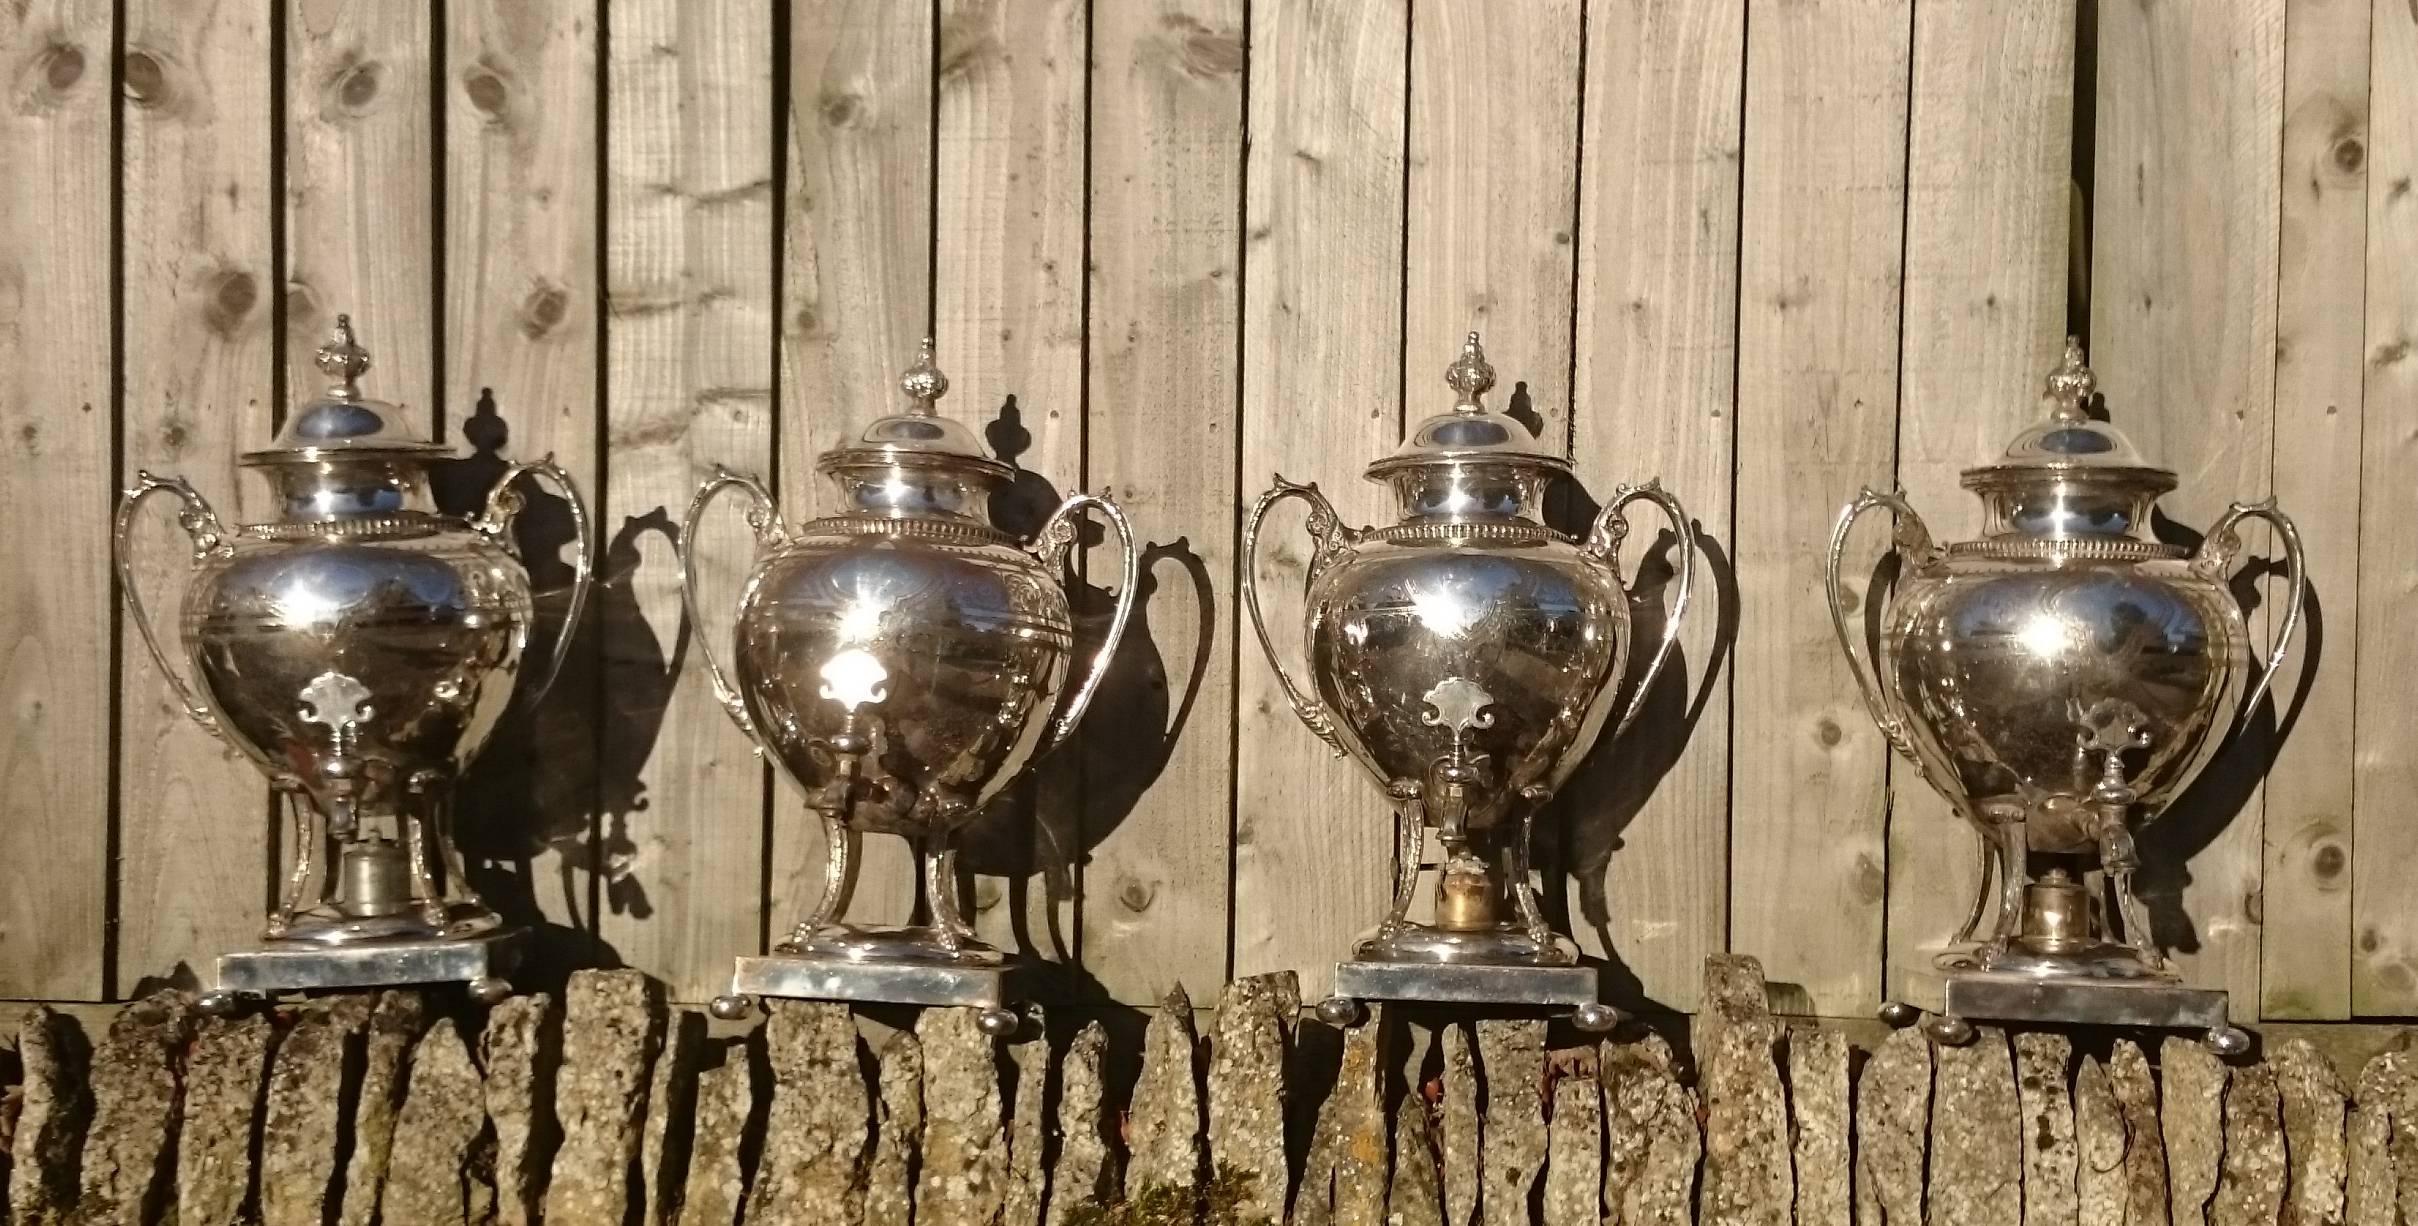 Very rare set of four large-scale antique electroplated kettles. These are fairly ornate kettles made after Rococo designs that would have been popular in the 1750s. The decoration consists of floral swags and scrolling and the top finial is of